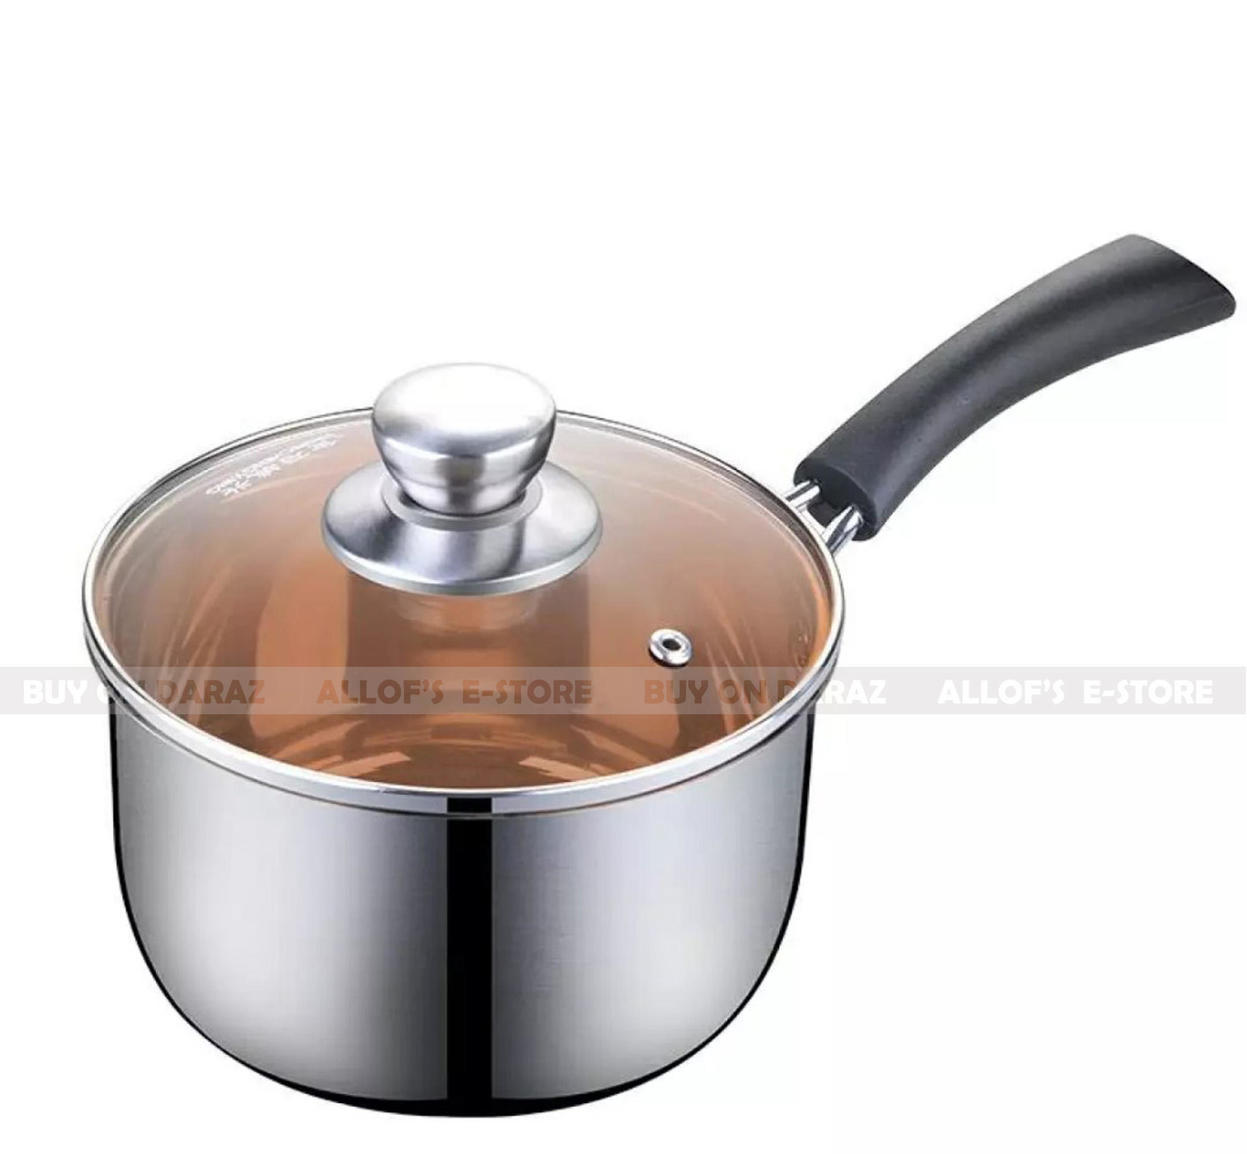 stainless steel saucepan18cm with lid easy clean dishwasher safe